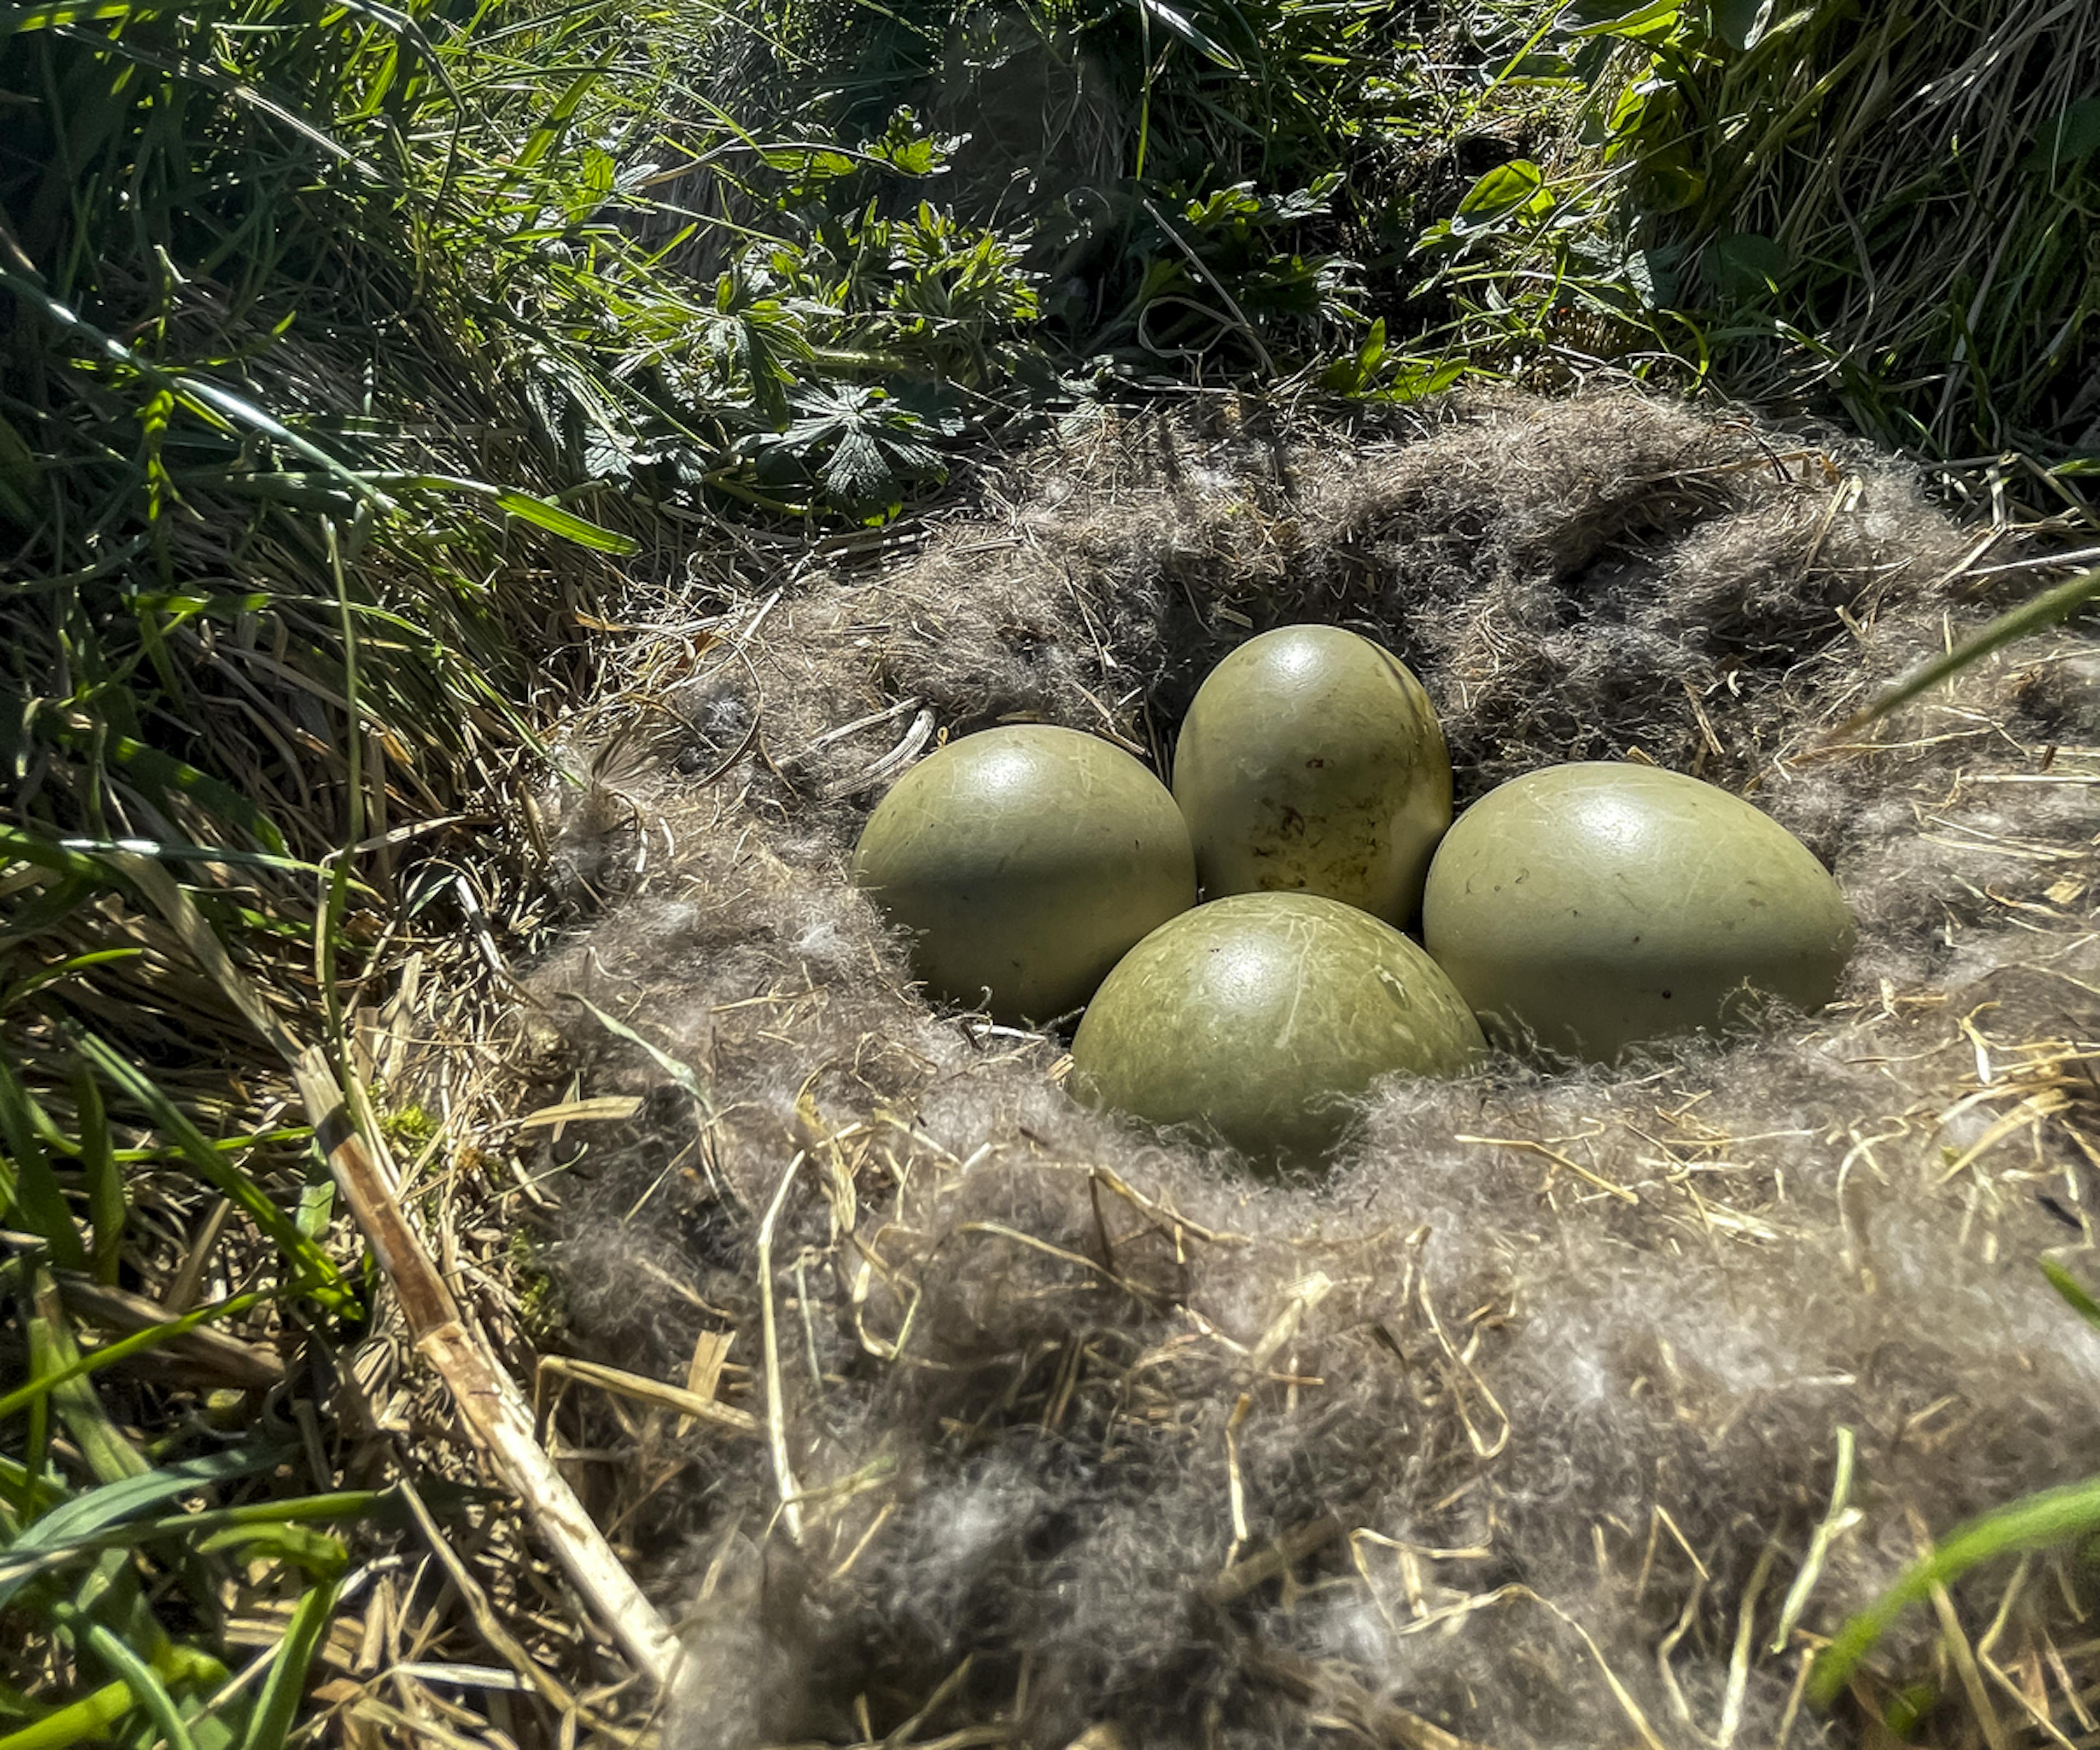 Common Eider eggs with down